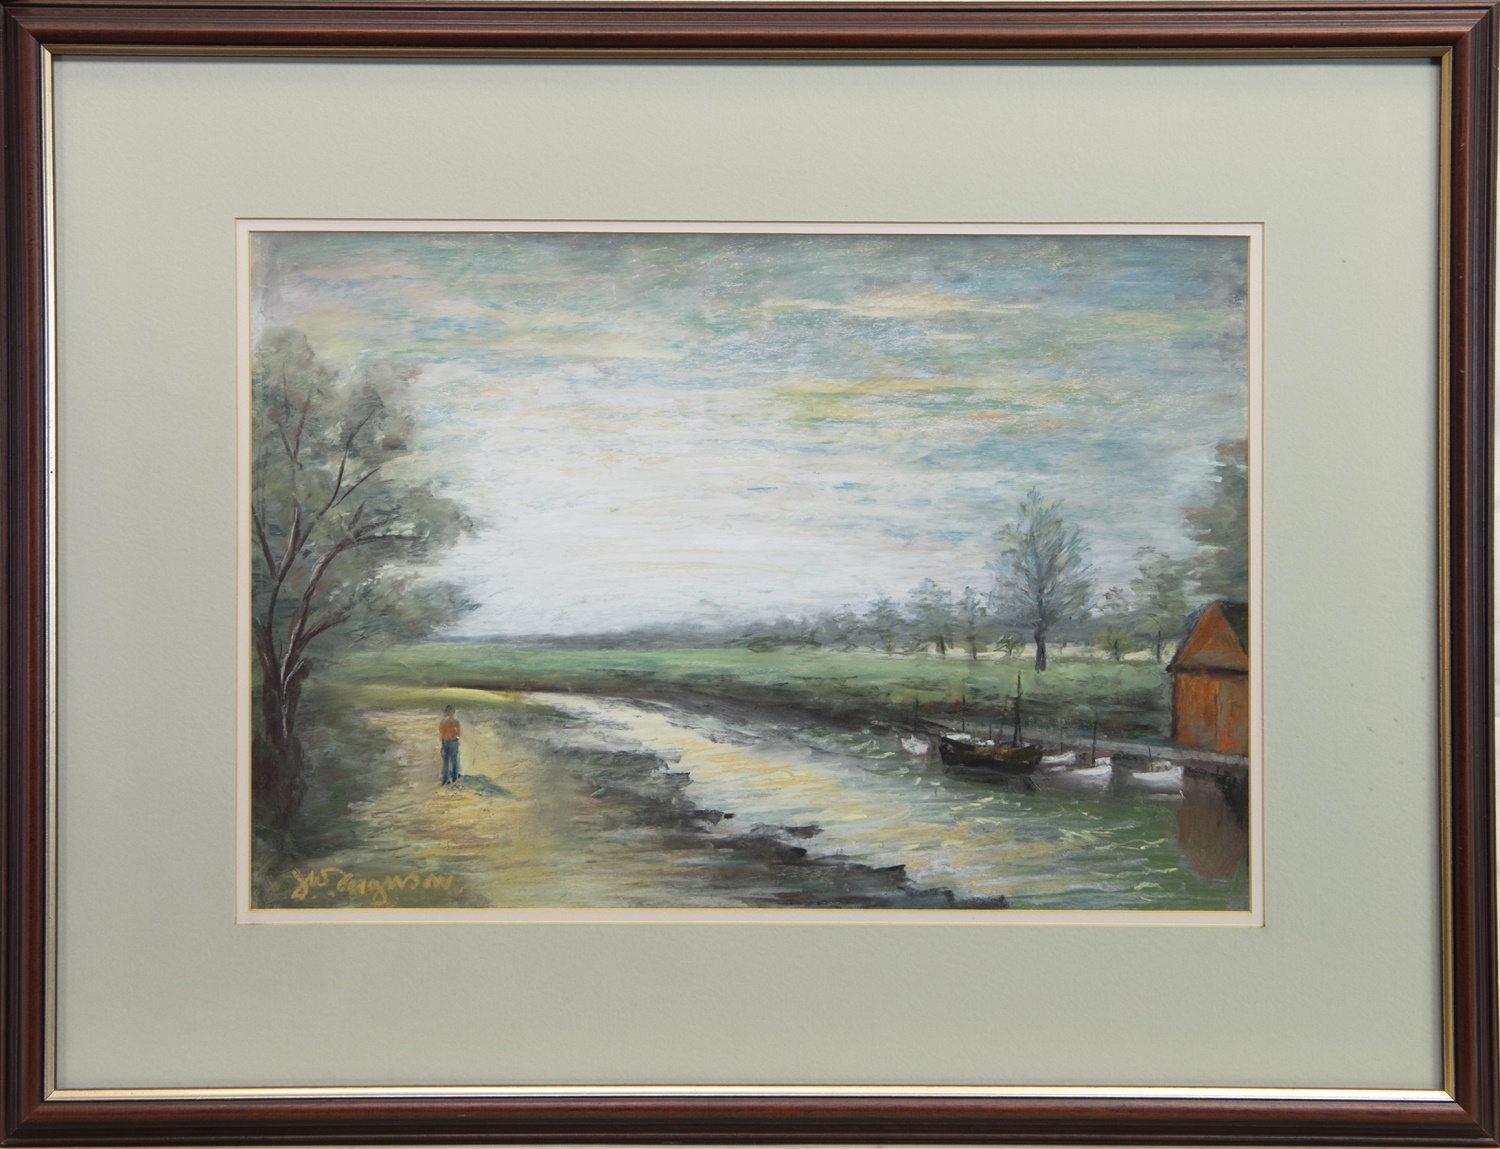 STROLL ON THE BANKS, A MIXED MEDIA BY J W FERGUSON